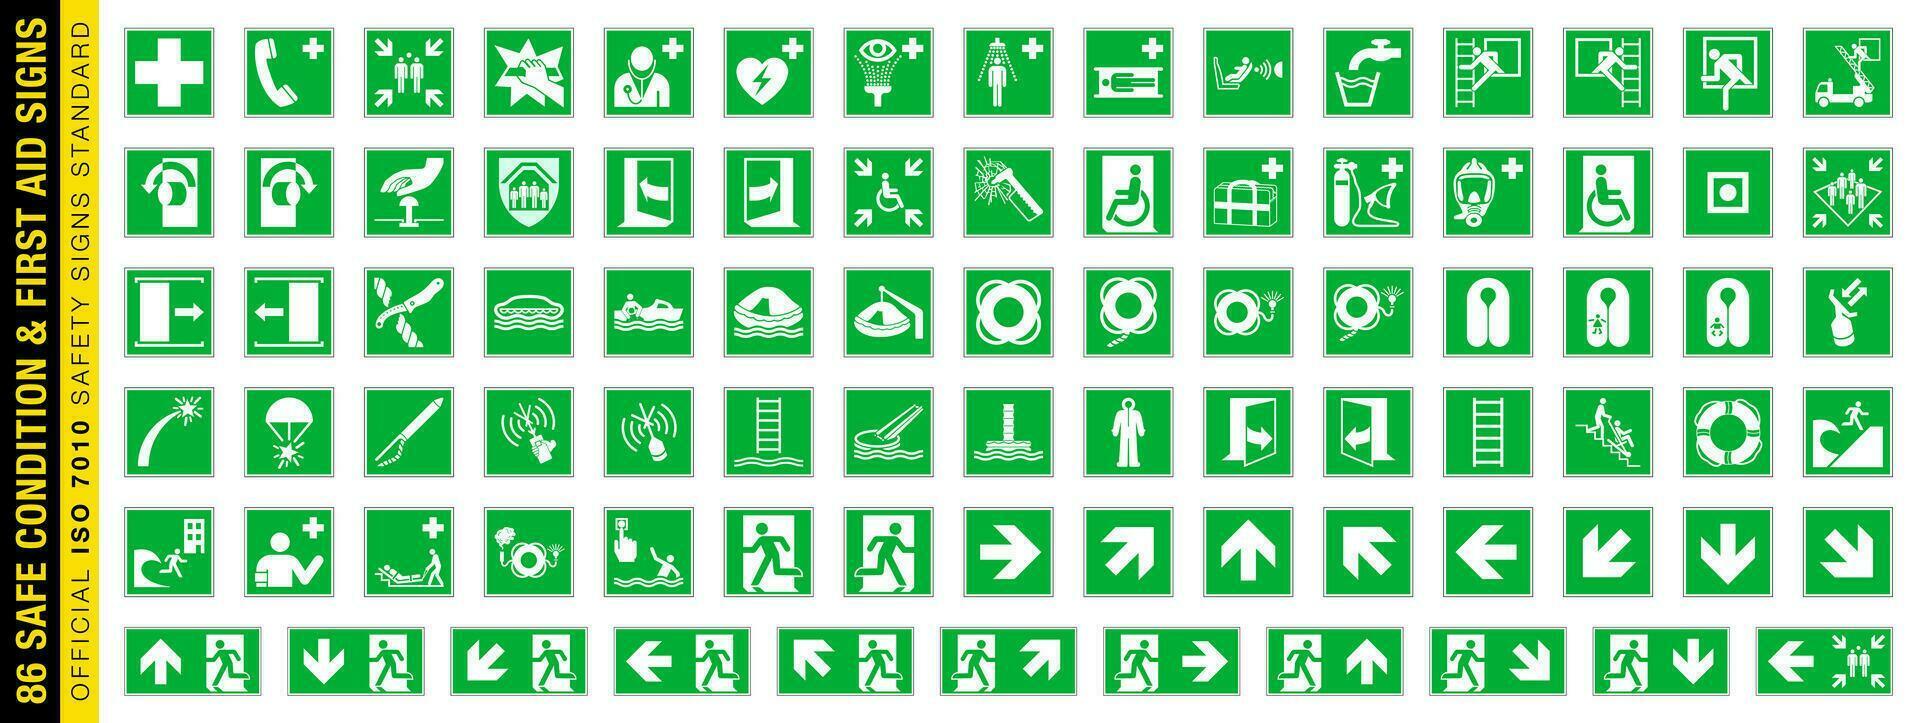 Full set of 86 isolated Safe condition and first aid symbols on green board. Official ISO 7010 safety signs standard. vector